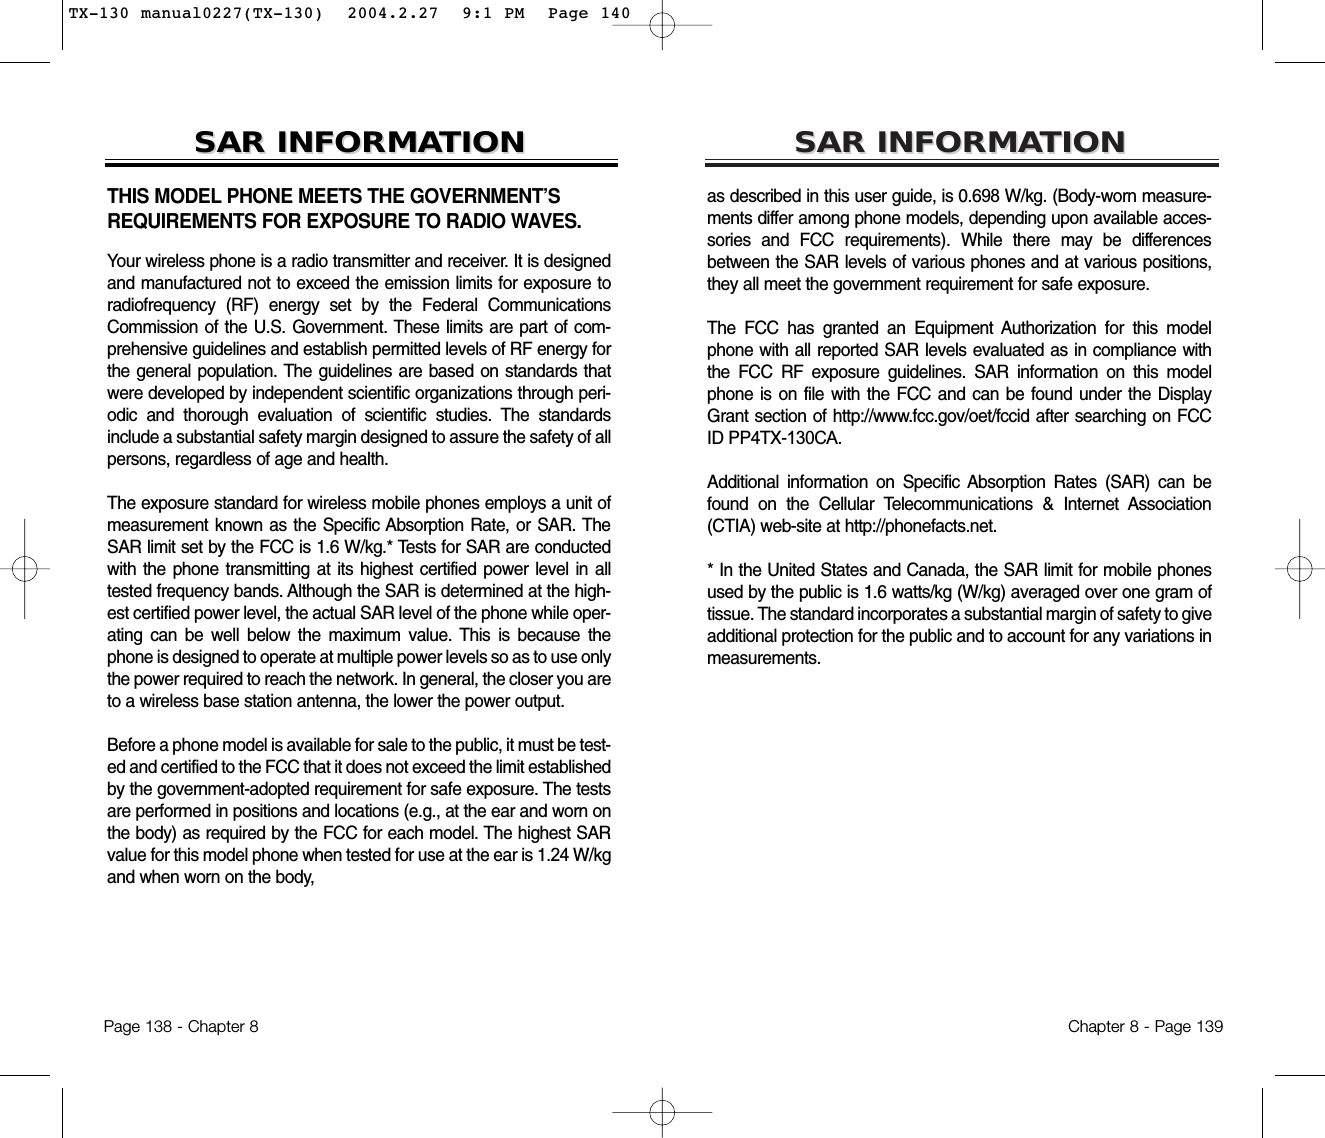 SARSAR INFORMAINFORMATIONTIONas described in this user guide, is 0.698 W/kg. (Body-worn measure-ments differ among phone models, depending upon available acces-sories and FCC requirements). While there may be differencesbetween the SAR levels of various phones and at various positions,they all meet the government requirement for safe exposure.The FCC has granted an Equipment Authorization for this modelphone with all reported SAR levels evaluated as in compliance withthe FCC RF exposure guidelines. SAR information on this modelphone is on file with the FCC and can be found under the DisplayGrant section of http://www.fcc.gov/oet/fccid after searching on FCCID PP4TX-130CA. Additional information on Specific Absorption Rates (SAR) can befound on the Cellular Telecommunications &amp; Internet Association(CTIA) web-site at http://phonefacts.net.* In the United States and Canada, the SAR limit for mobile phonesused by the public is 1.6 watts/kg (W/kg) averaged over one gram oftissue. The standard incorporates a substantial margin of safety to giveadditional protection for the public and to account for any variations inmeasurements.Chapter 8 - Page 139THIS MODEL PHONE MEETS THE GOVERNMENT’SREQUIREMENTS FOR EXPOSURE TO RADIO WAVES.Your wireless phone is a radio transmitter and receiver. It is designedand manufactured not to exceed the emission limits for exposure toradiofrequency (RF) energy set by the Federal CommunicationsCommission of the U.S. Government. These limits are part of com-prehensive guidelines and establish permitted levels of RF energy forthe general population. The guidelines are based on standards thatwere developed by independent scientific organizations through peri-odic and thorough evaluation of scientific studies. The standardsinclude a substantial safety margin designed to assure the safety of allpersons, regardless of age and health.The exposure standard for wireless mobile phones employs a unit ofmeasurement known as the Specific Absorption Rate, or SAR. TheSAR limit set by the FCC is 1.6 W/kg.* Tests for SAR are conductedwith the phone transmitting at its highest certified power level in alltested frequency bands. Although the SAR is determined at the high-est certified power level, the actual SAR level of the phone while oper-ating can be well below the maximum value. This is because thephone is designed to operate at multiple power levels so as to use onlythe power required to reach the network. In general, the closer you areto a wireless base station antenna, the lower the power output. Before a phone model is available for sale to the public, it must be test-ed and certified to the FCC that it does not exceed the limit establishedby the government-adopted requirement for safe exposure. The testsare performed in positions and locations (e.g., at the ear and worn onthe body) as required by the FCC for each model. The highest SARvalue for this model phone when tested for use at the ear is 1.24 W/kgand when worn on the body, SARSAR INFORMAINFORMATIONTIONPage 138 - Chapter 8TX-130 manual0227(TX-130)  2004.2.27  9:1 PM  Page 140